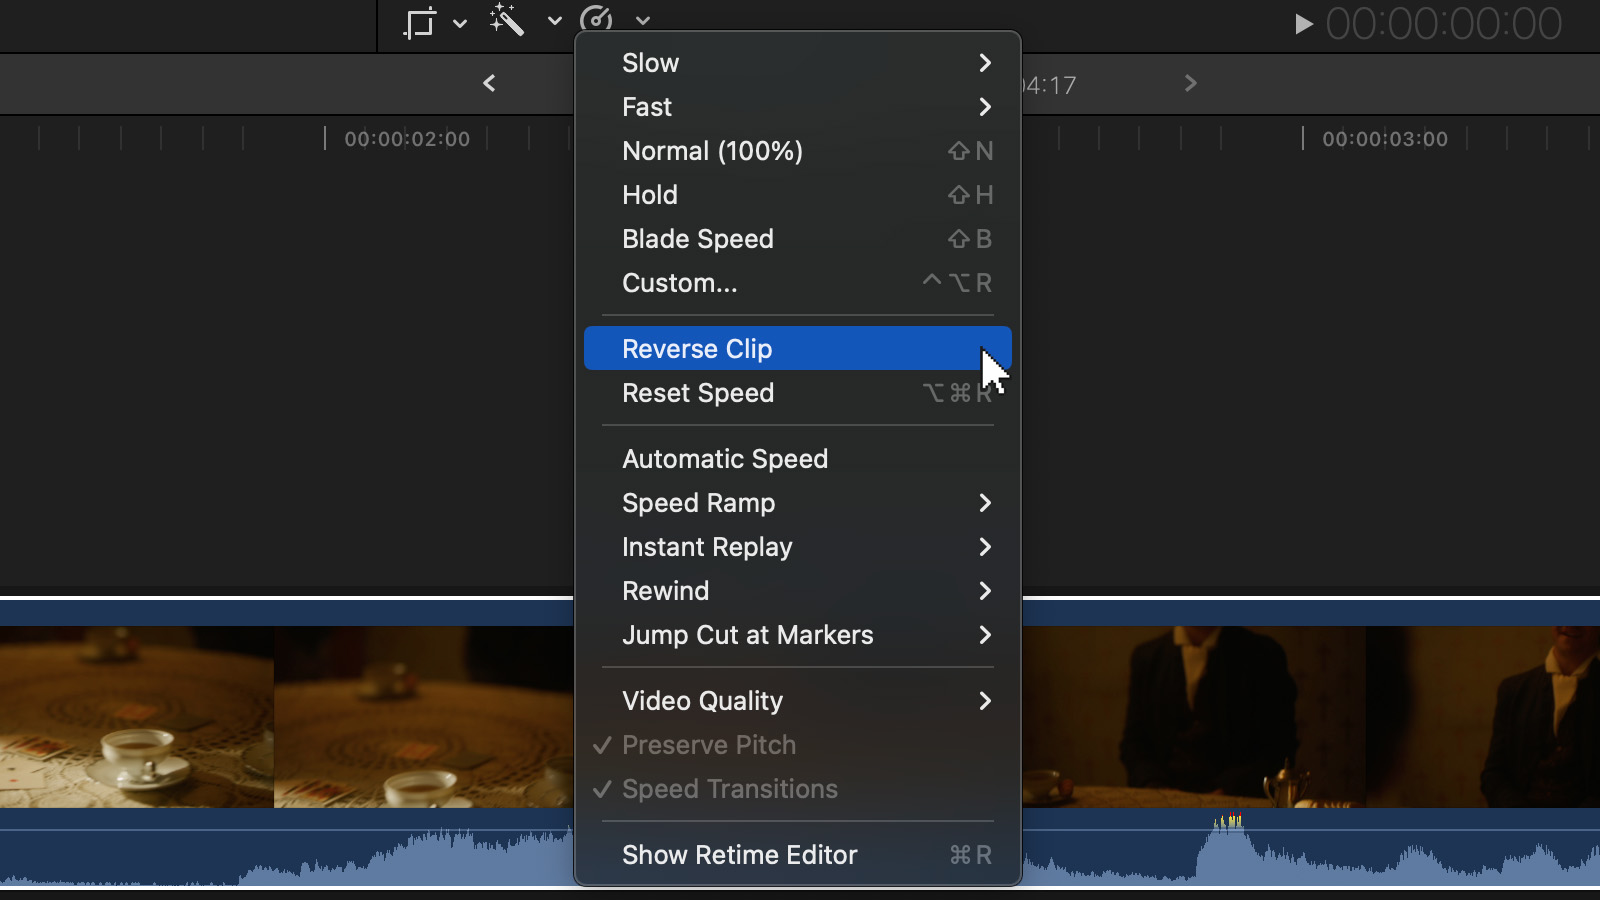 Select the clip, then pick the Reverse Clip option from the retiming dropdown menu.